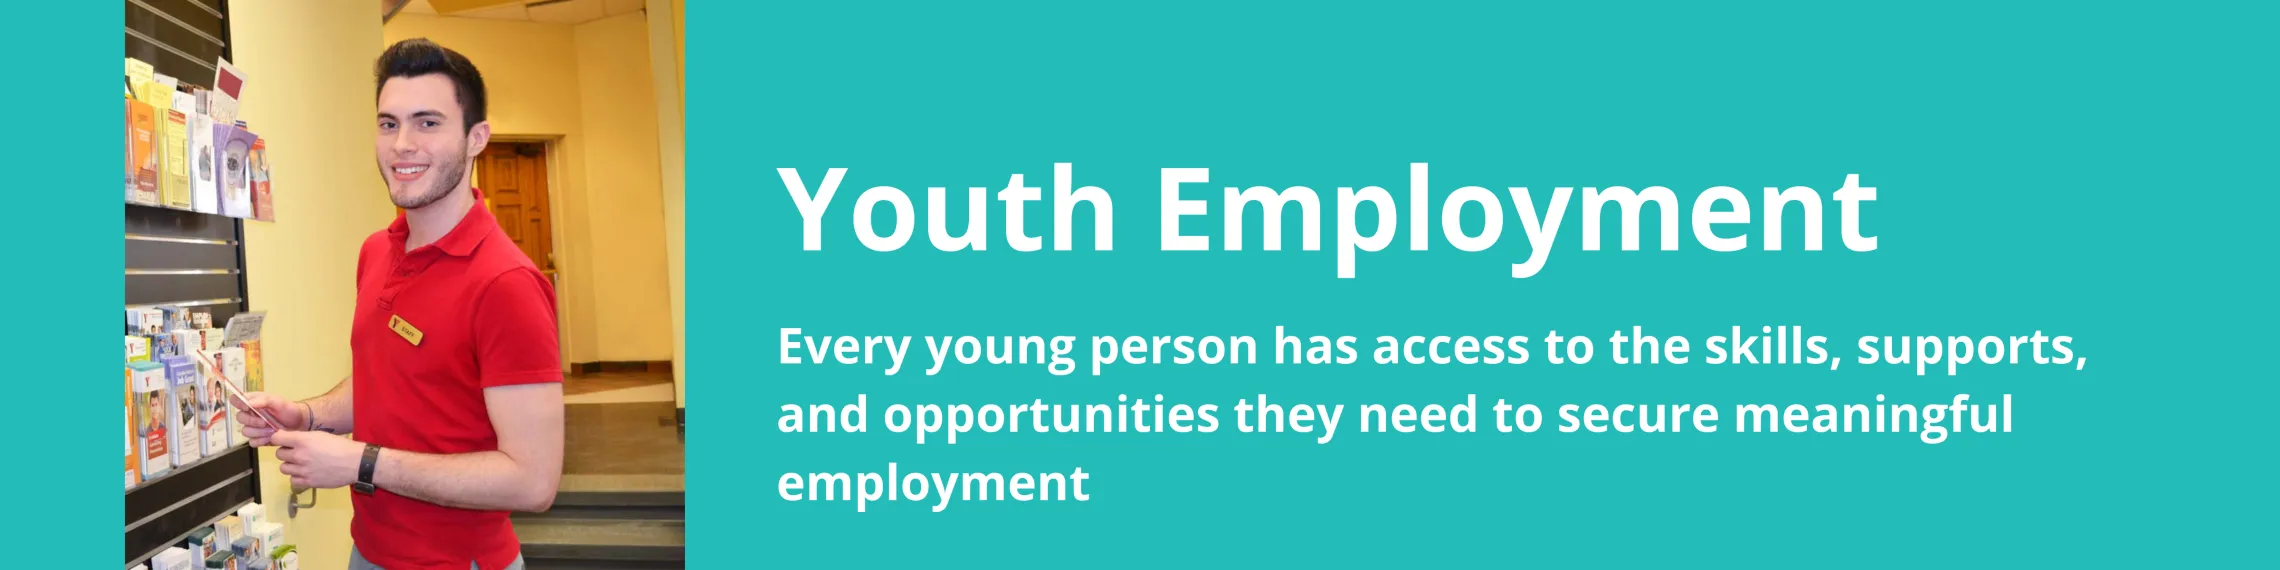 youth_employment